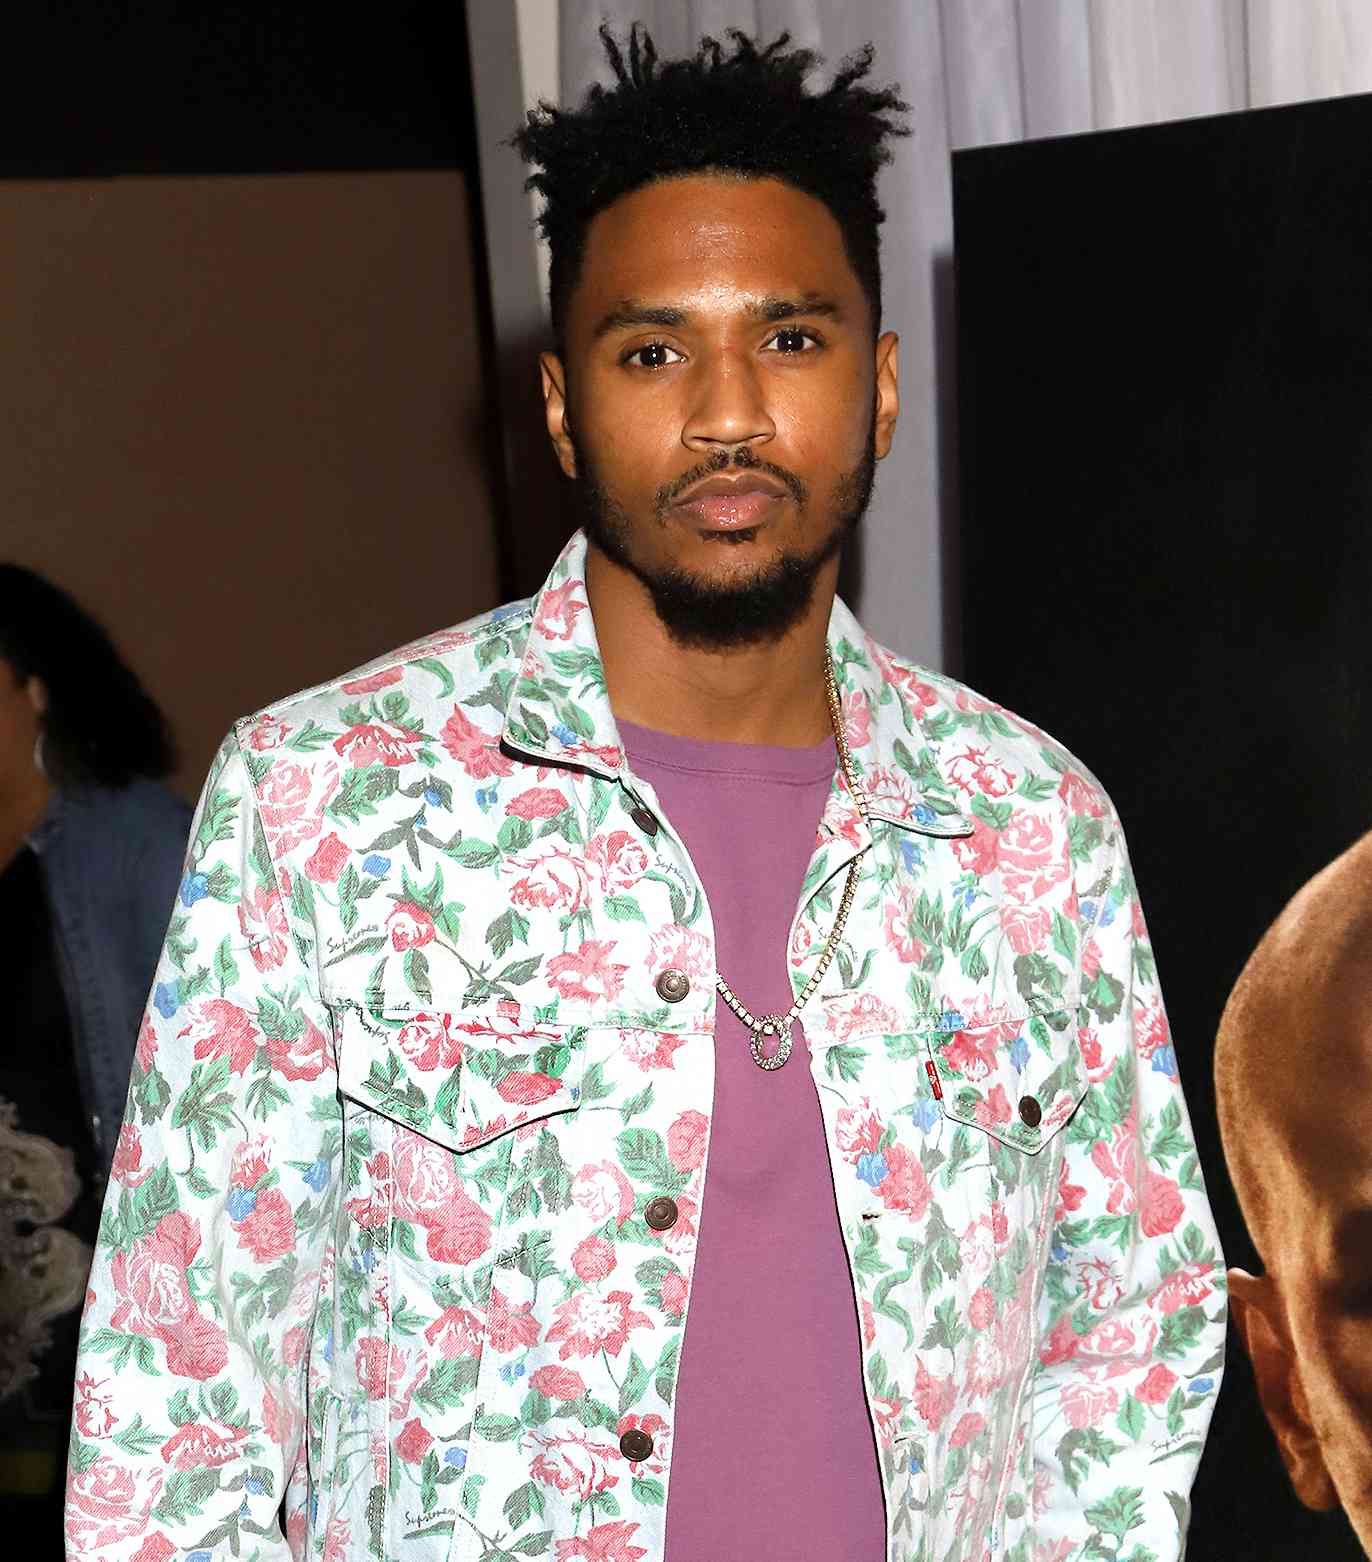 Trey Songz takes plea deal in bowling alley attack, 10 charges dropped